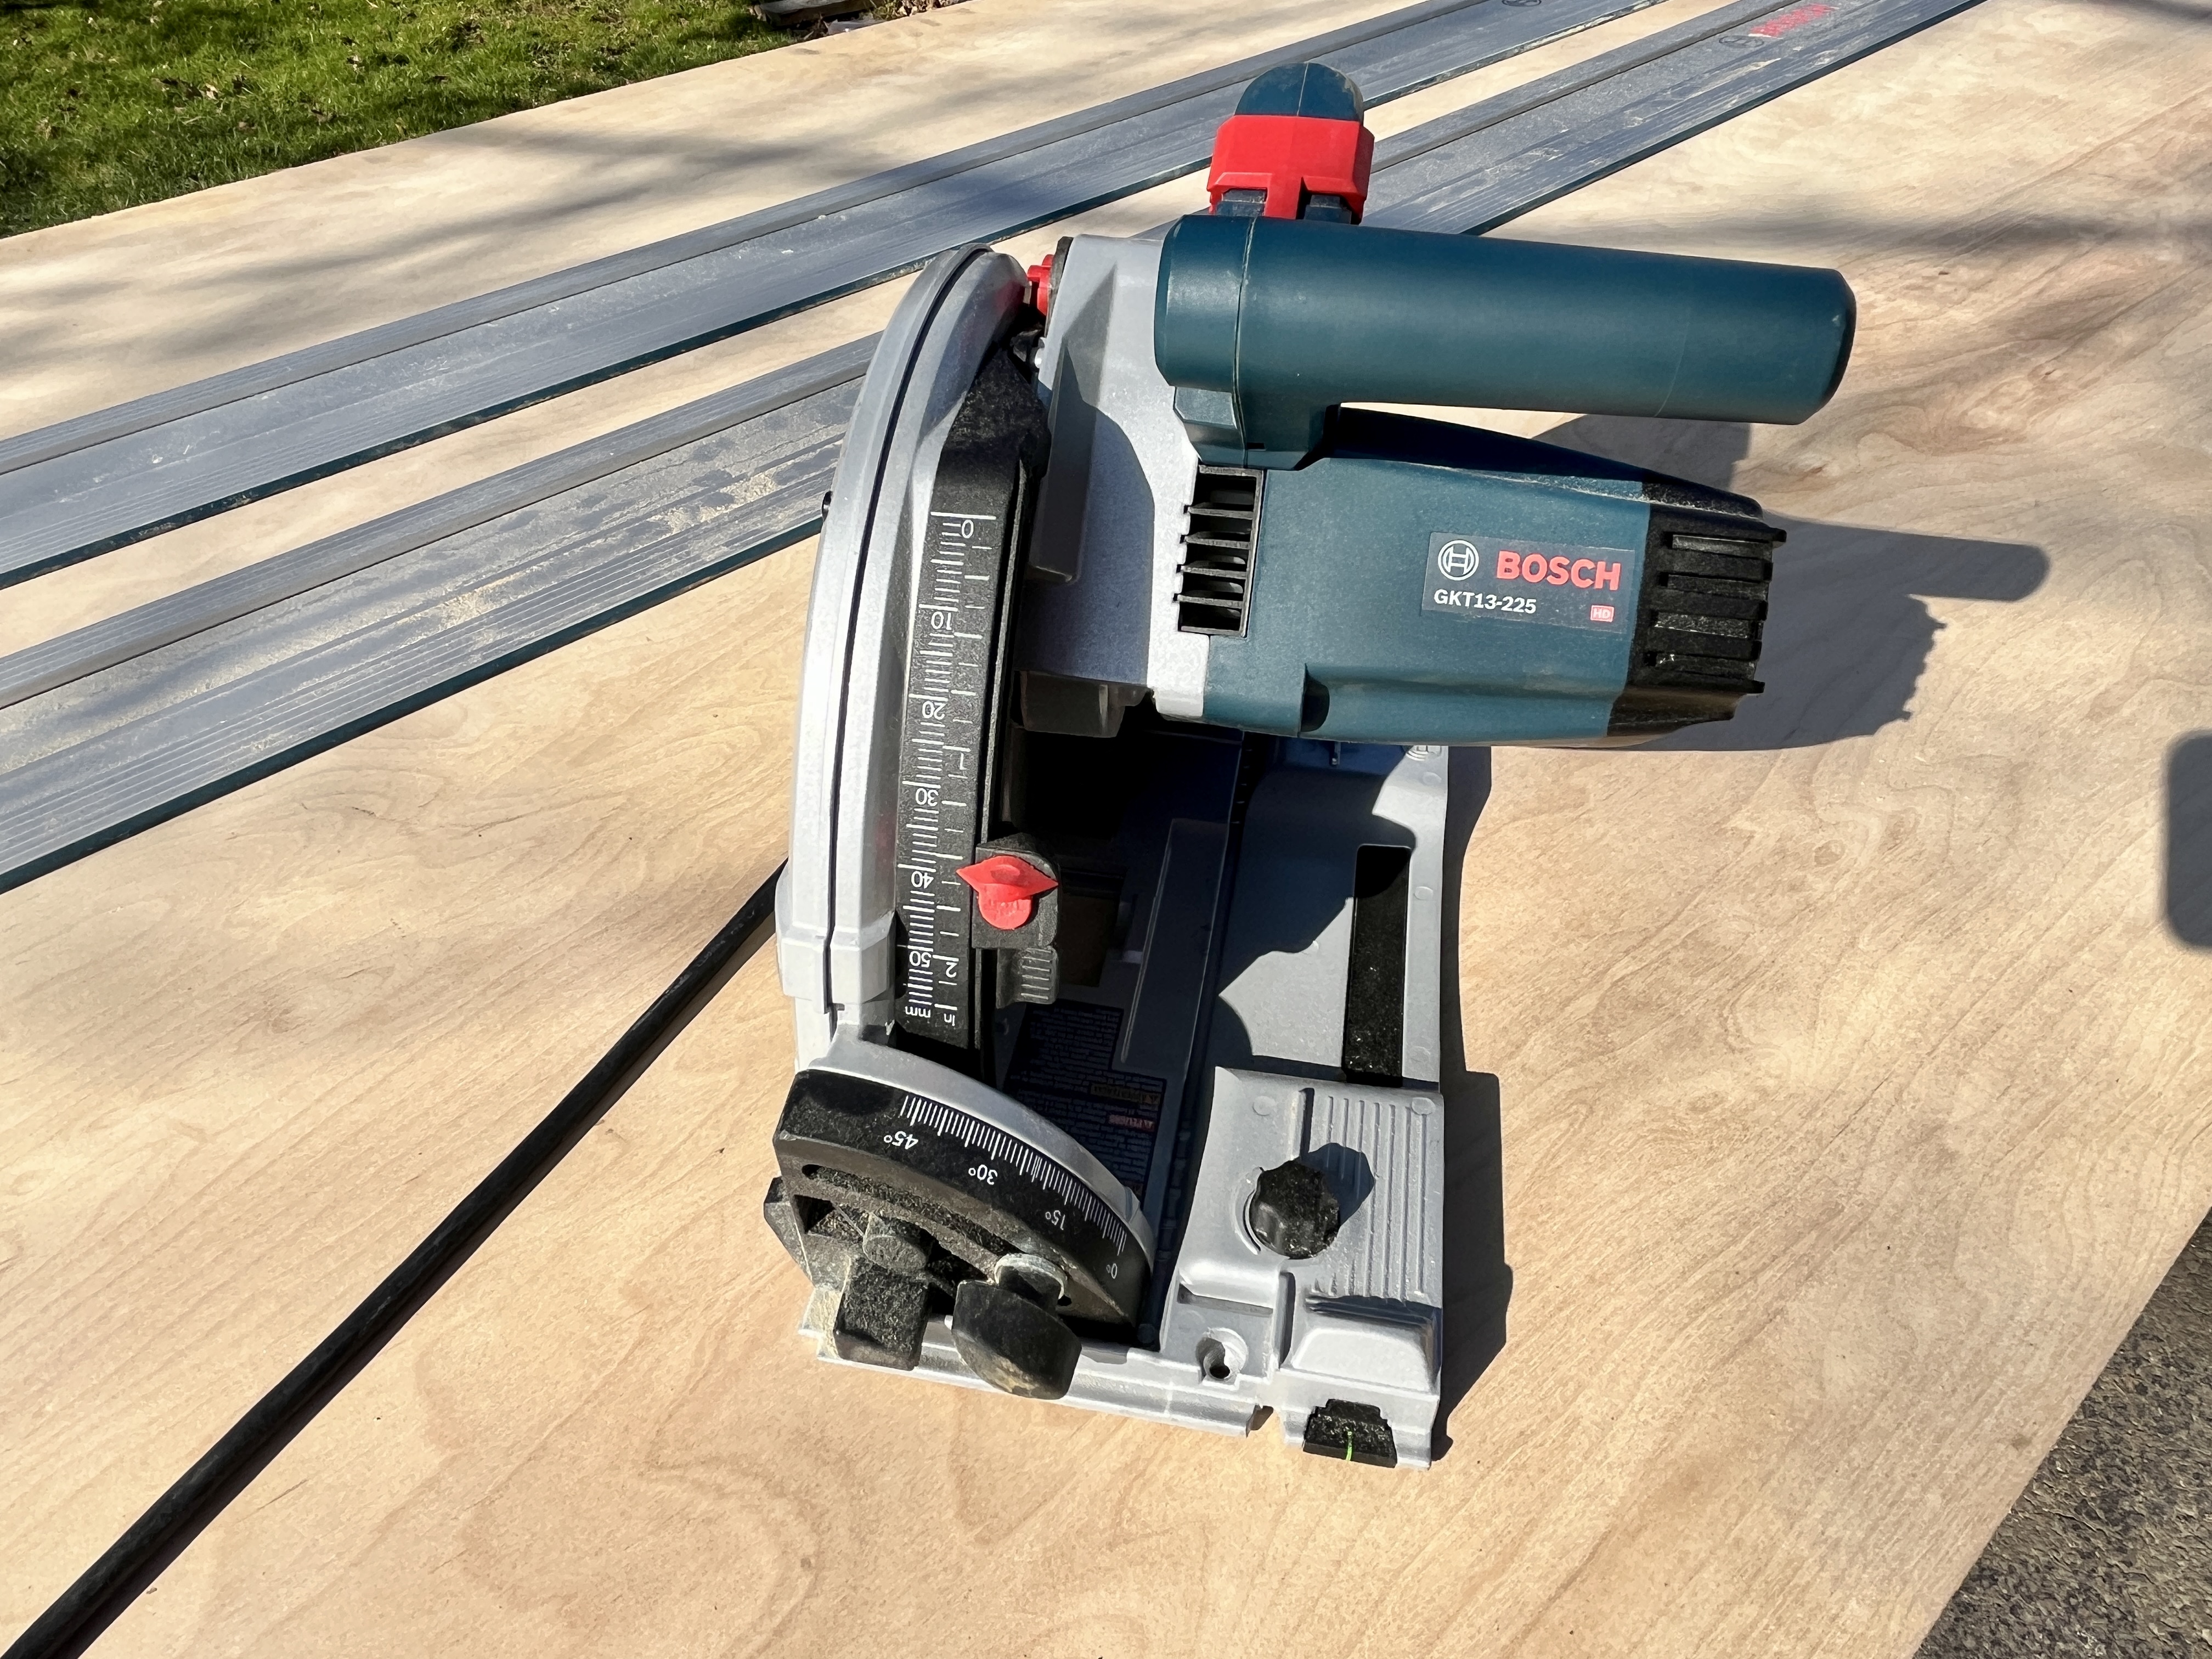 A Bosch track saw rests on plywood before testing.